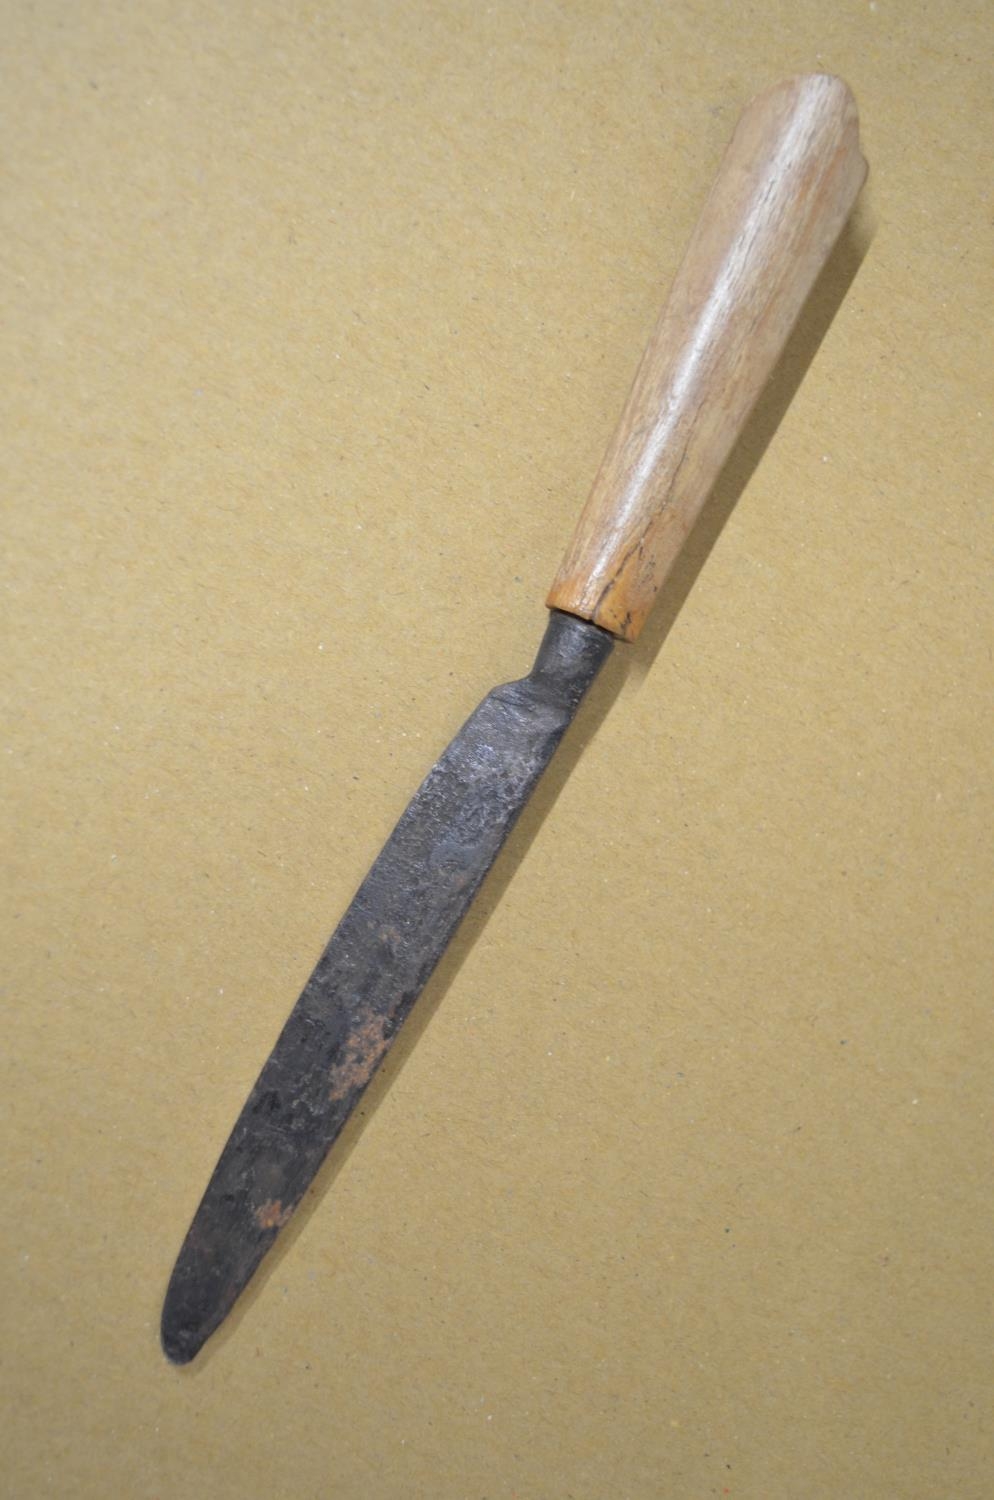 English Tudor period knife with bone handle (possibly a later addition), found in the River - Image 2 of 3